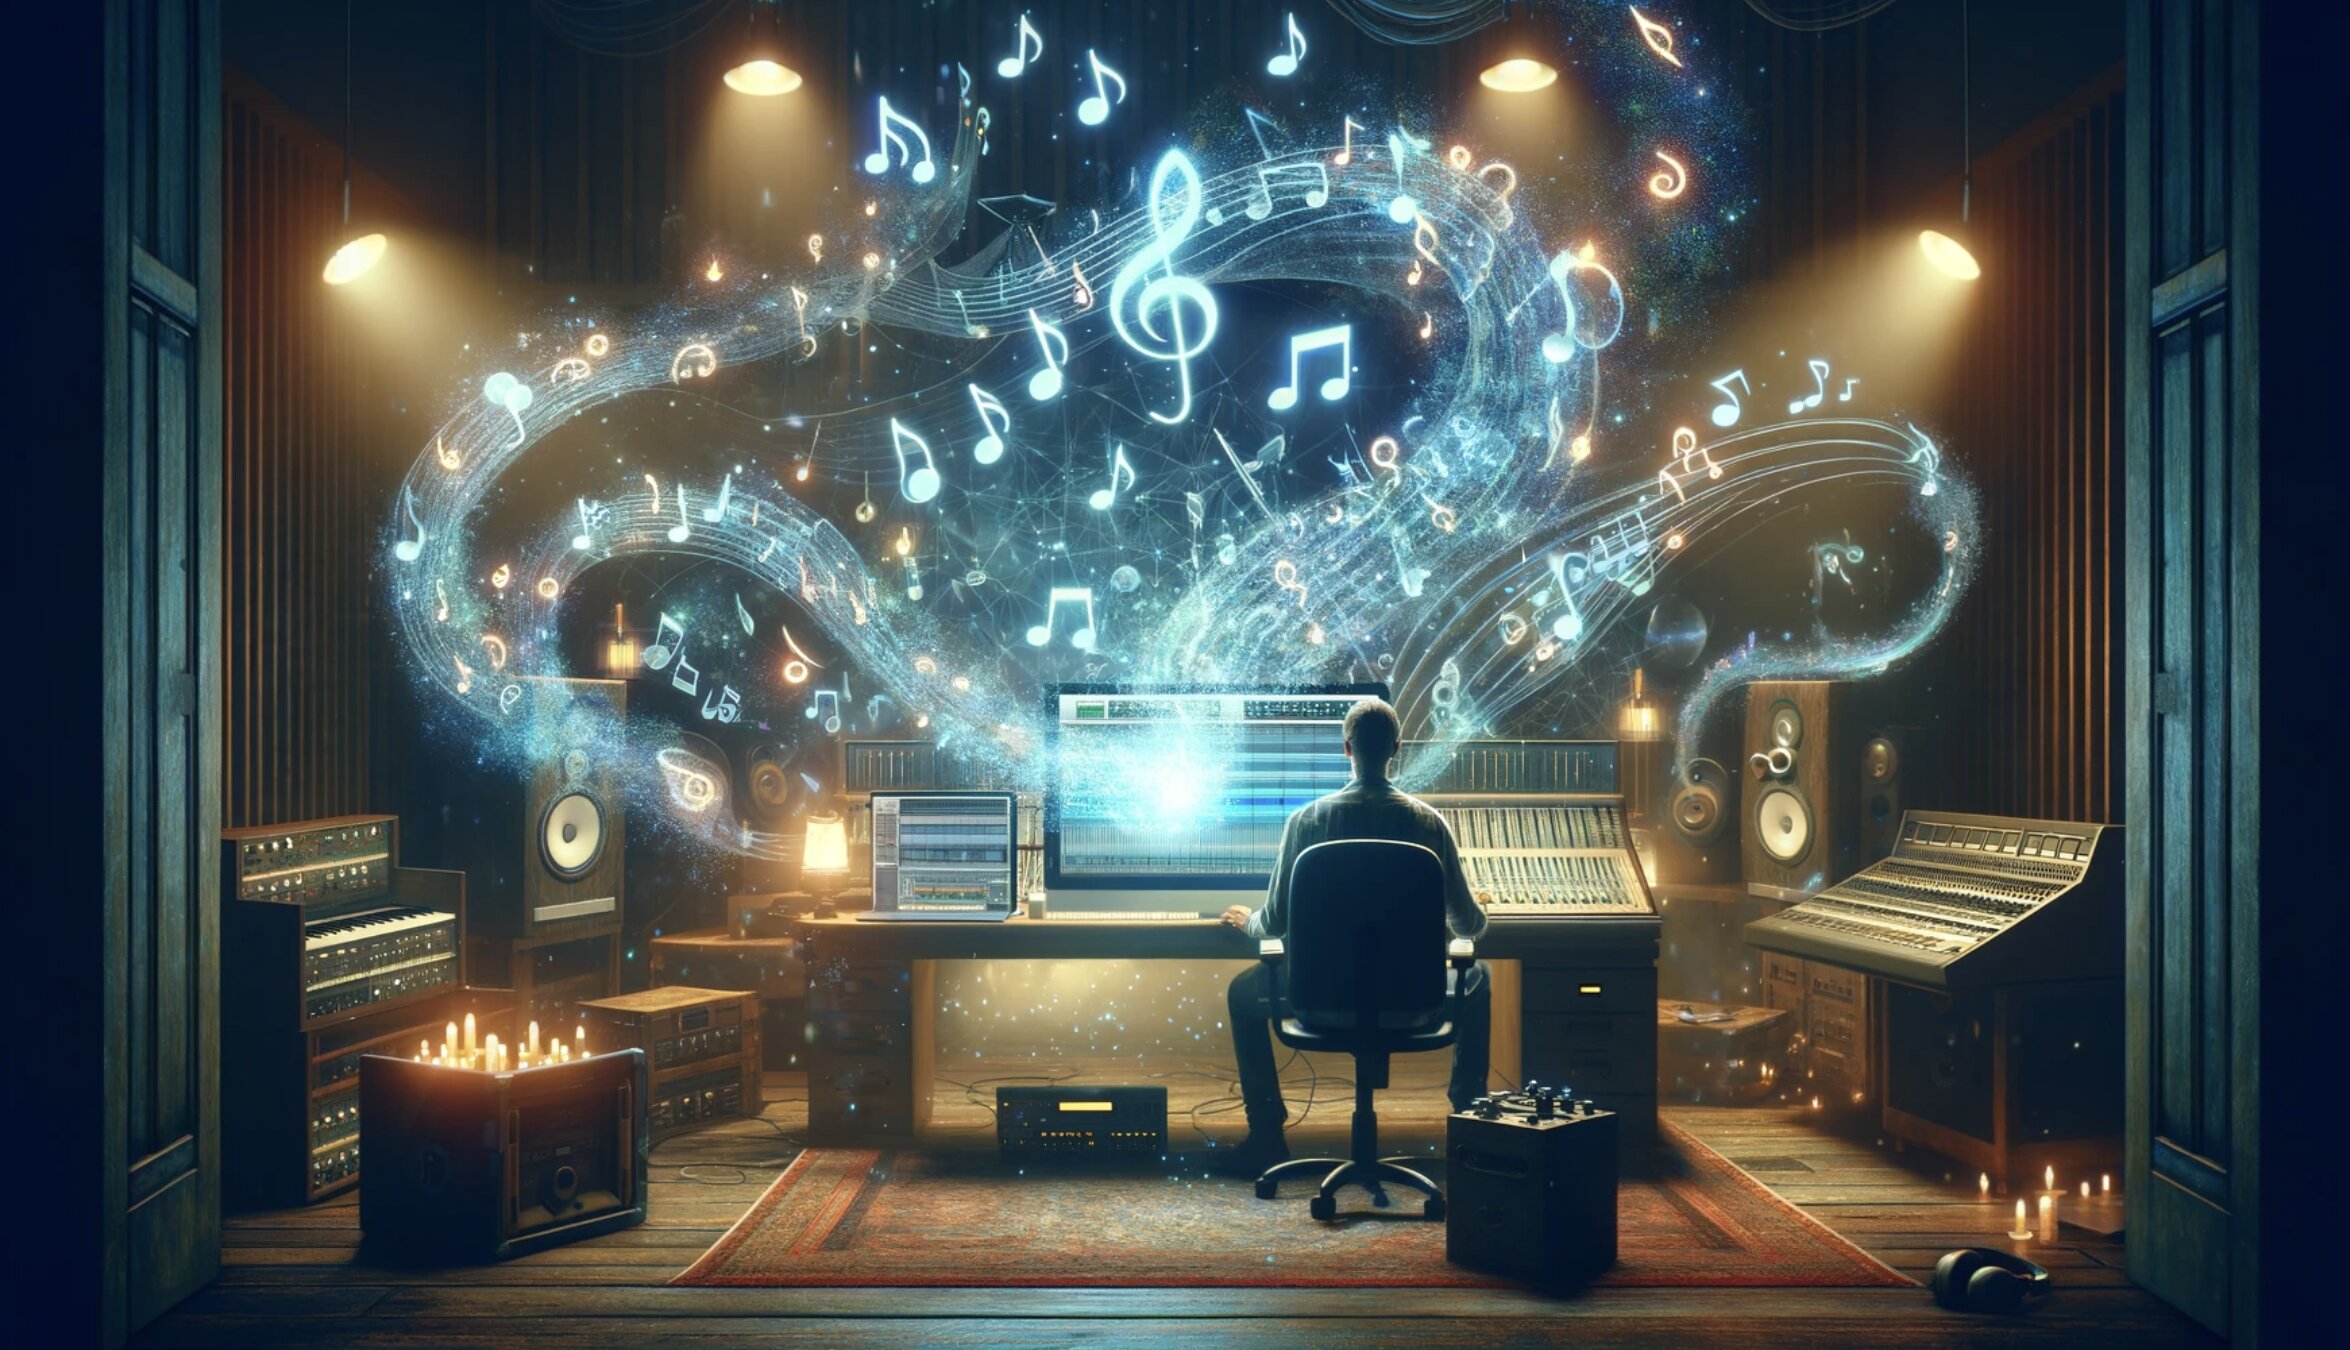 #Sony’s vision for a new paradigm in music production